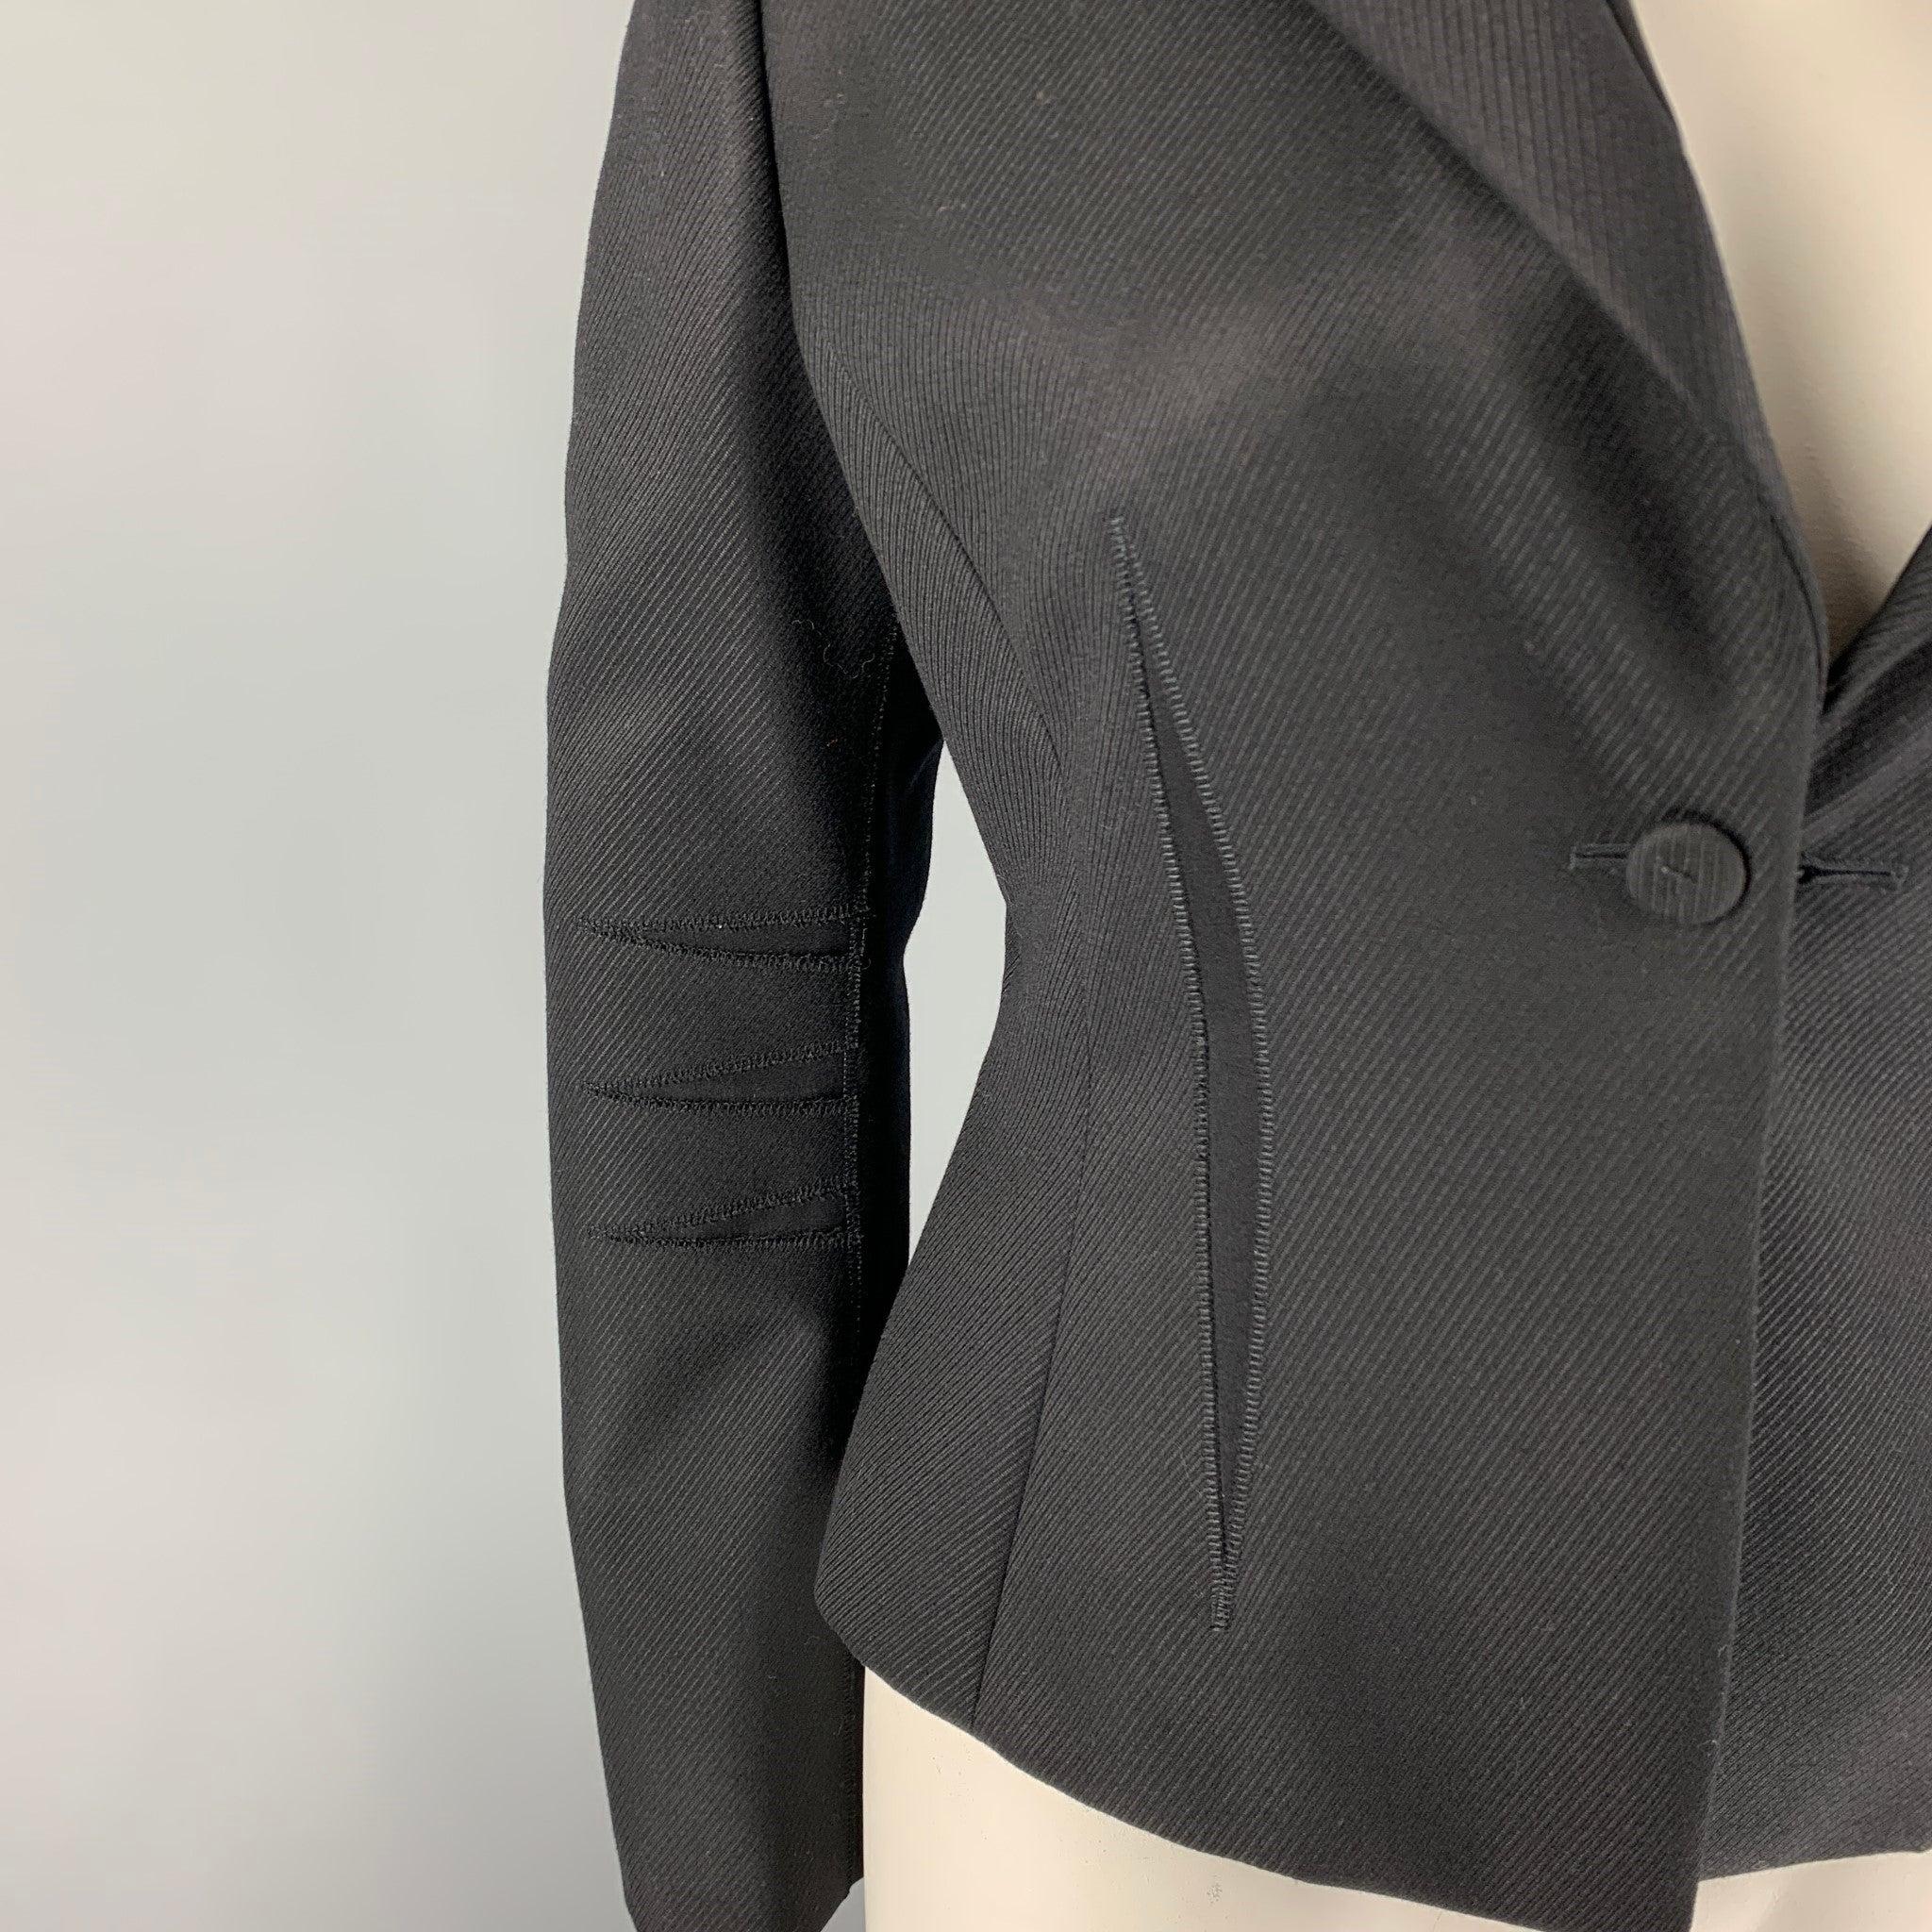 BRIONI jacket comes in a black wool with a full liner featuring a cropped style, double notch lapel design, top stitching designs, and a single button closure.
Excellent
Pre-Owned Condition. 

Marked:   46 R  

Measurements: 
 
Shoulder: 17 inches